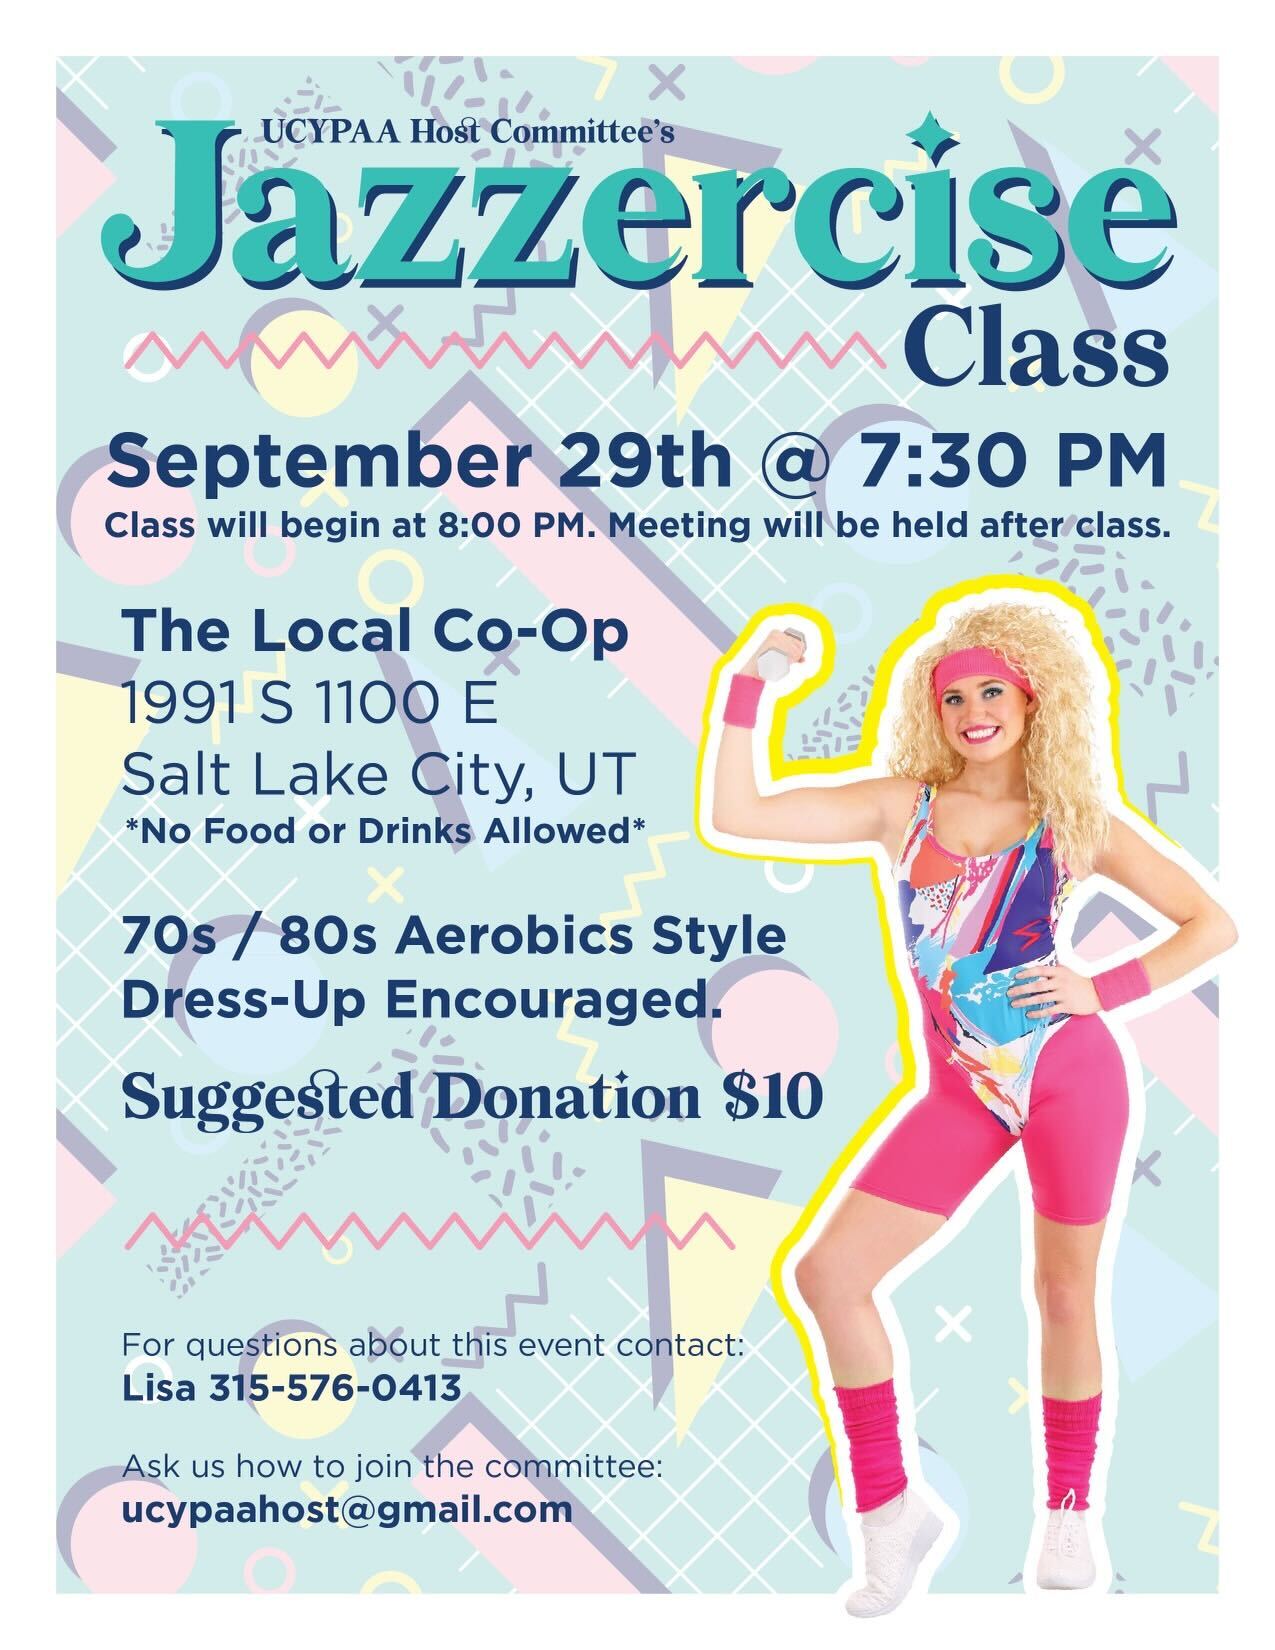 Featured image for “UCYPAA Jazzercise Class”